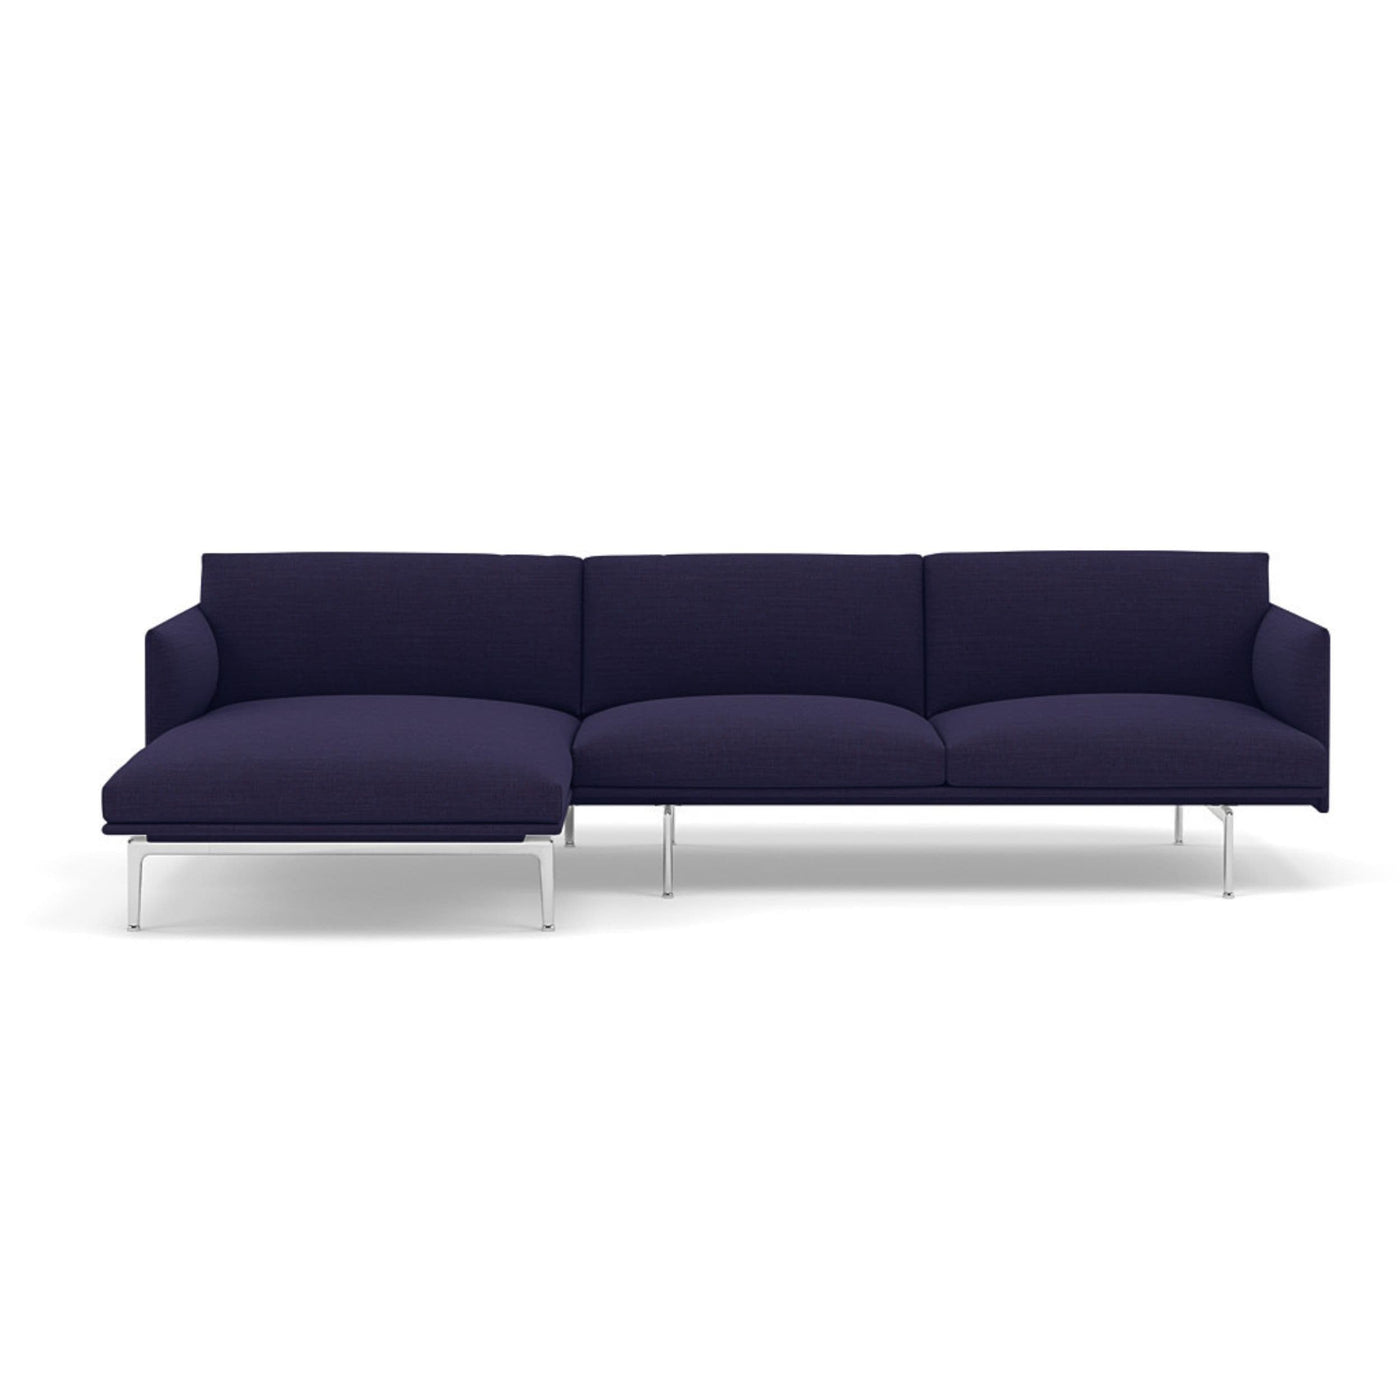 Muuto Outline Chaise Longue sofa in canvas 684. Made to order from someday designs.  #colour_canvas-684-blue